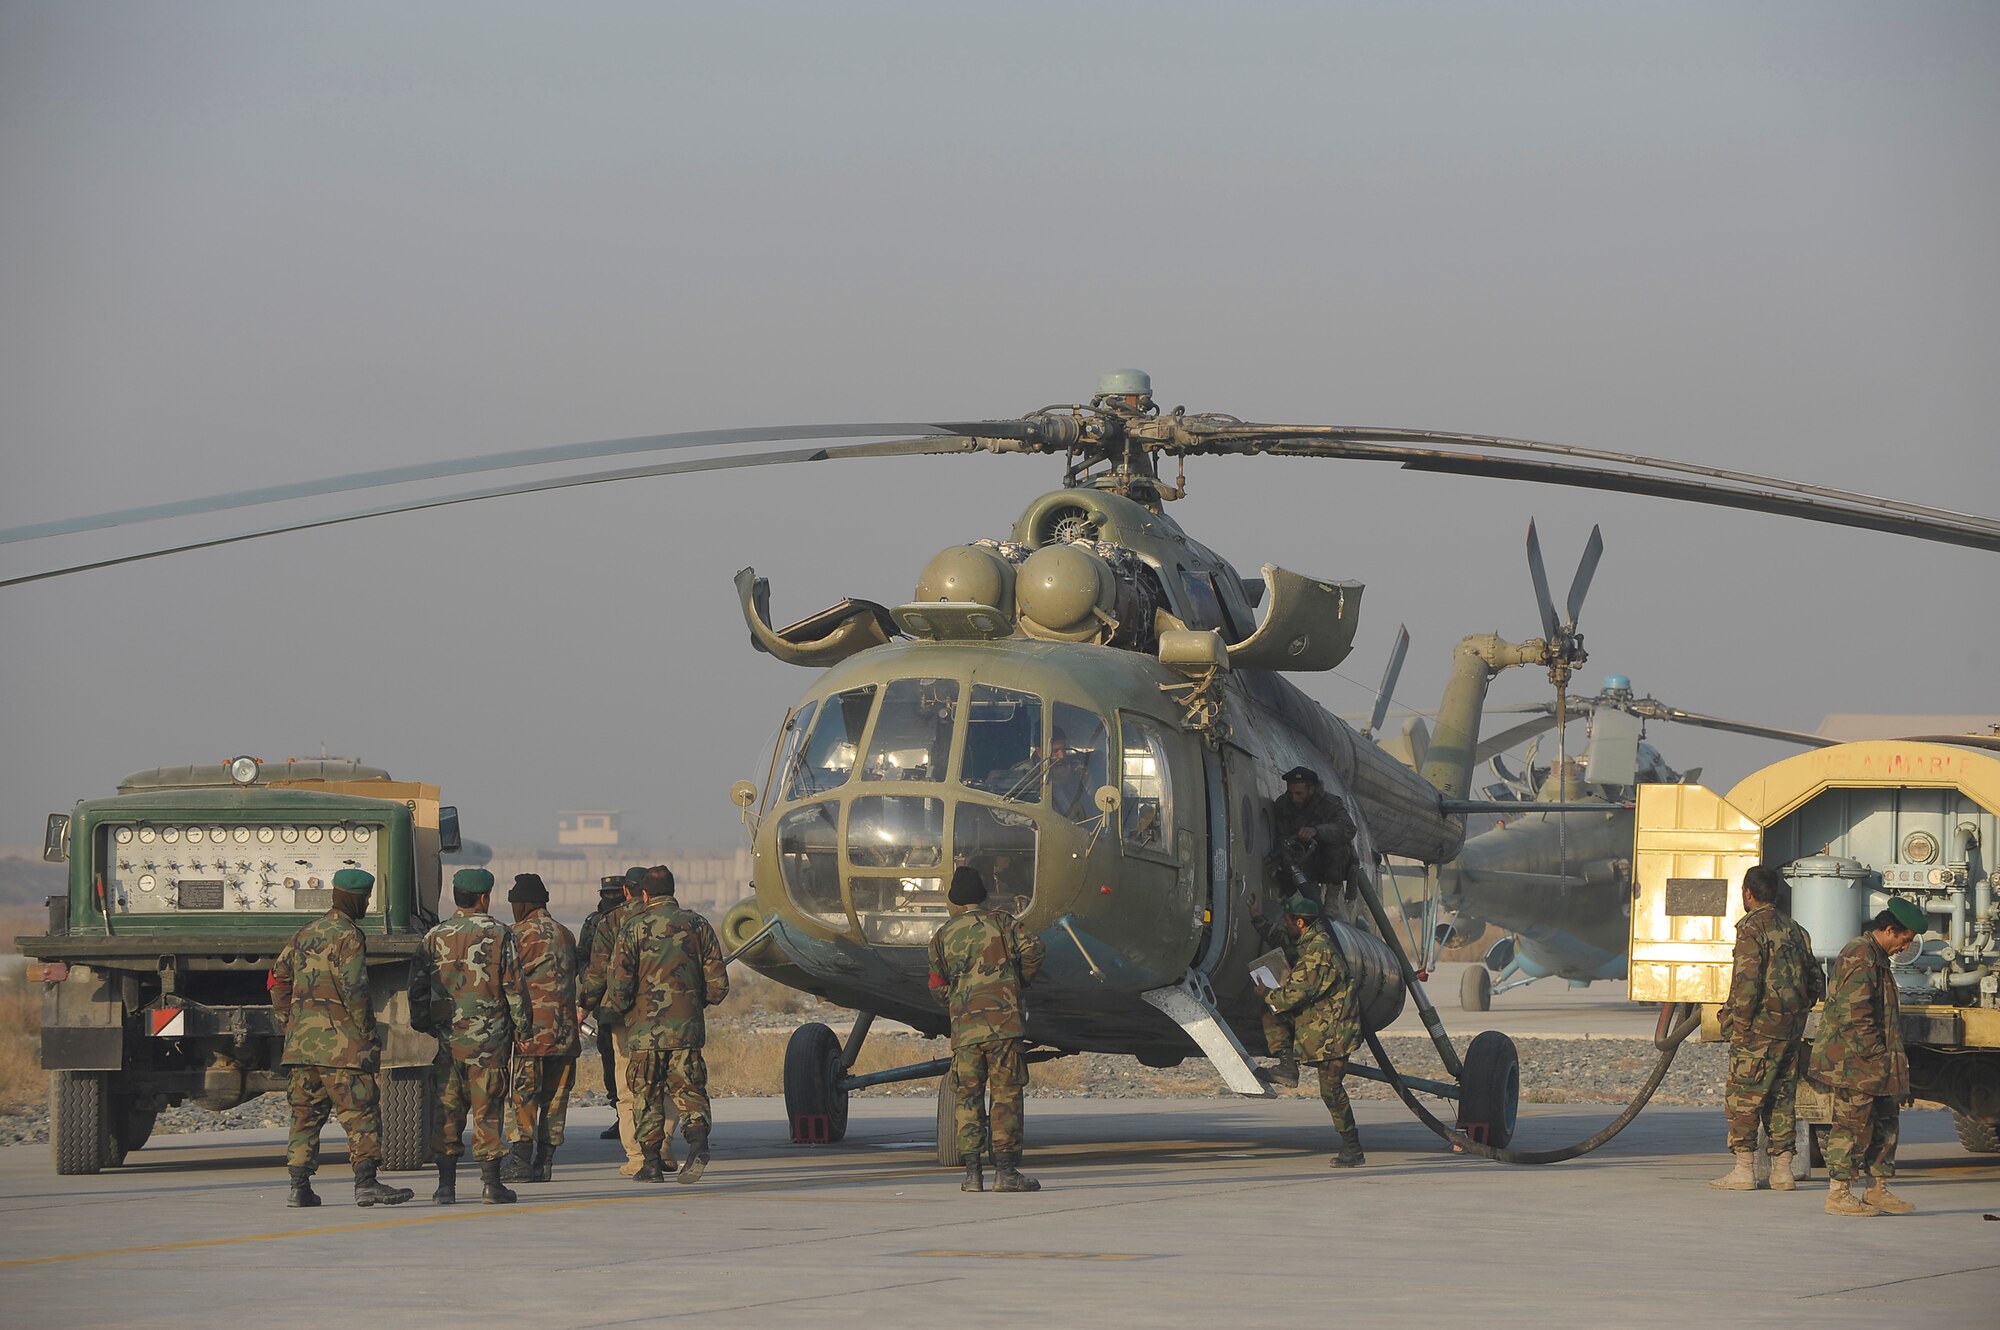 KABUL, Afghanistan -- Afghan National Army Air Corps Mi-17 maintenance crews prepare the helicopter for a mission supporting the Afghan National Army here. The ANAAC is being mentored by the 438th Air Expeditionary Wing and has made great advances in its ability to support the Afghan National Army.
(U.S. Air Force photo/Master Sgt. Keith Brown)